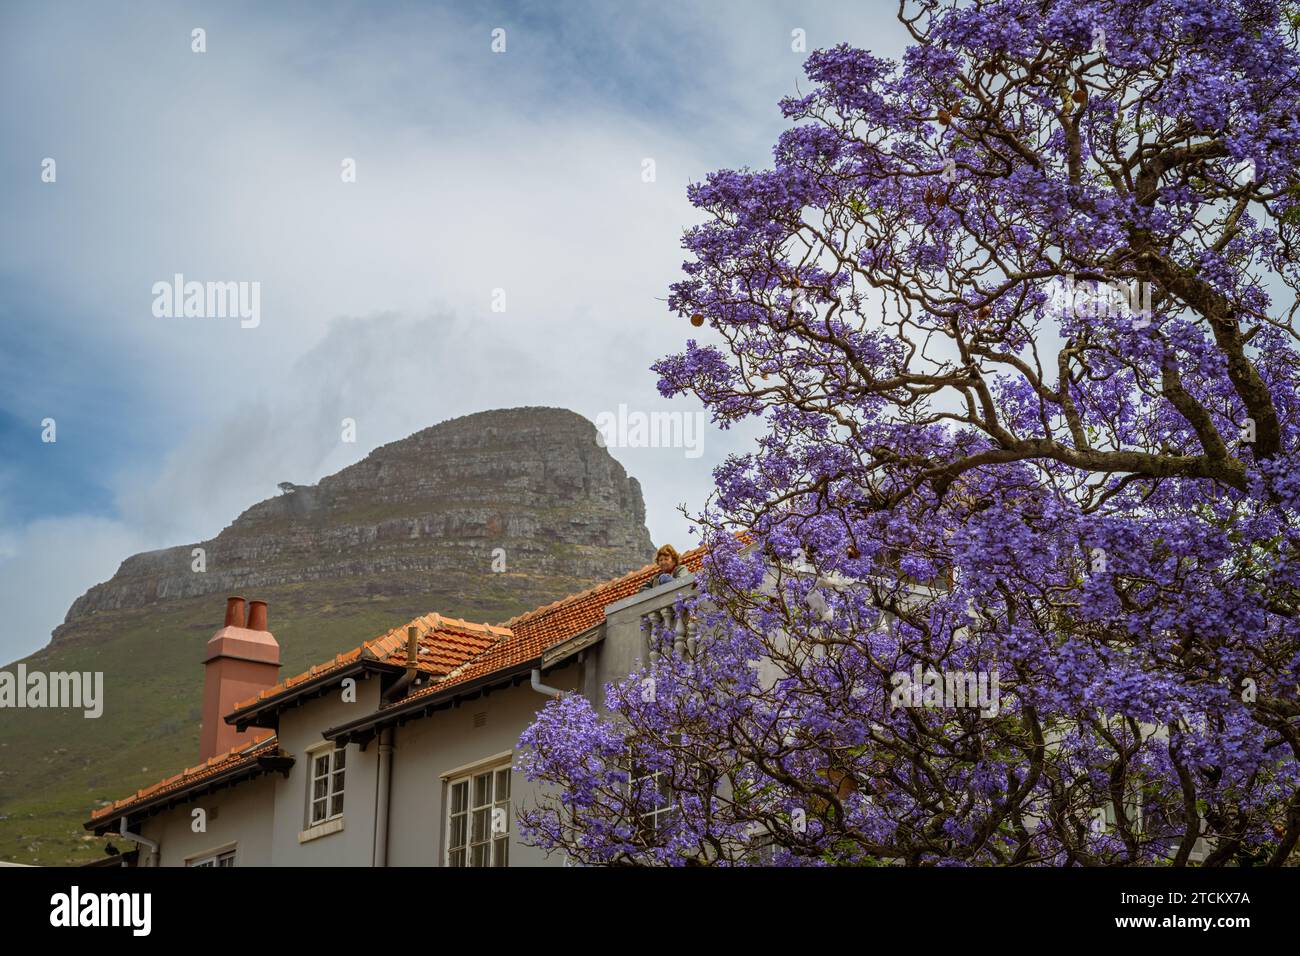 Devils Peak in the background with a jacaranda tree in front. Stock Photo